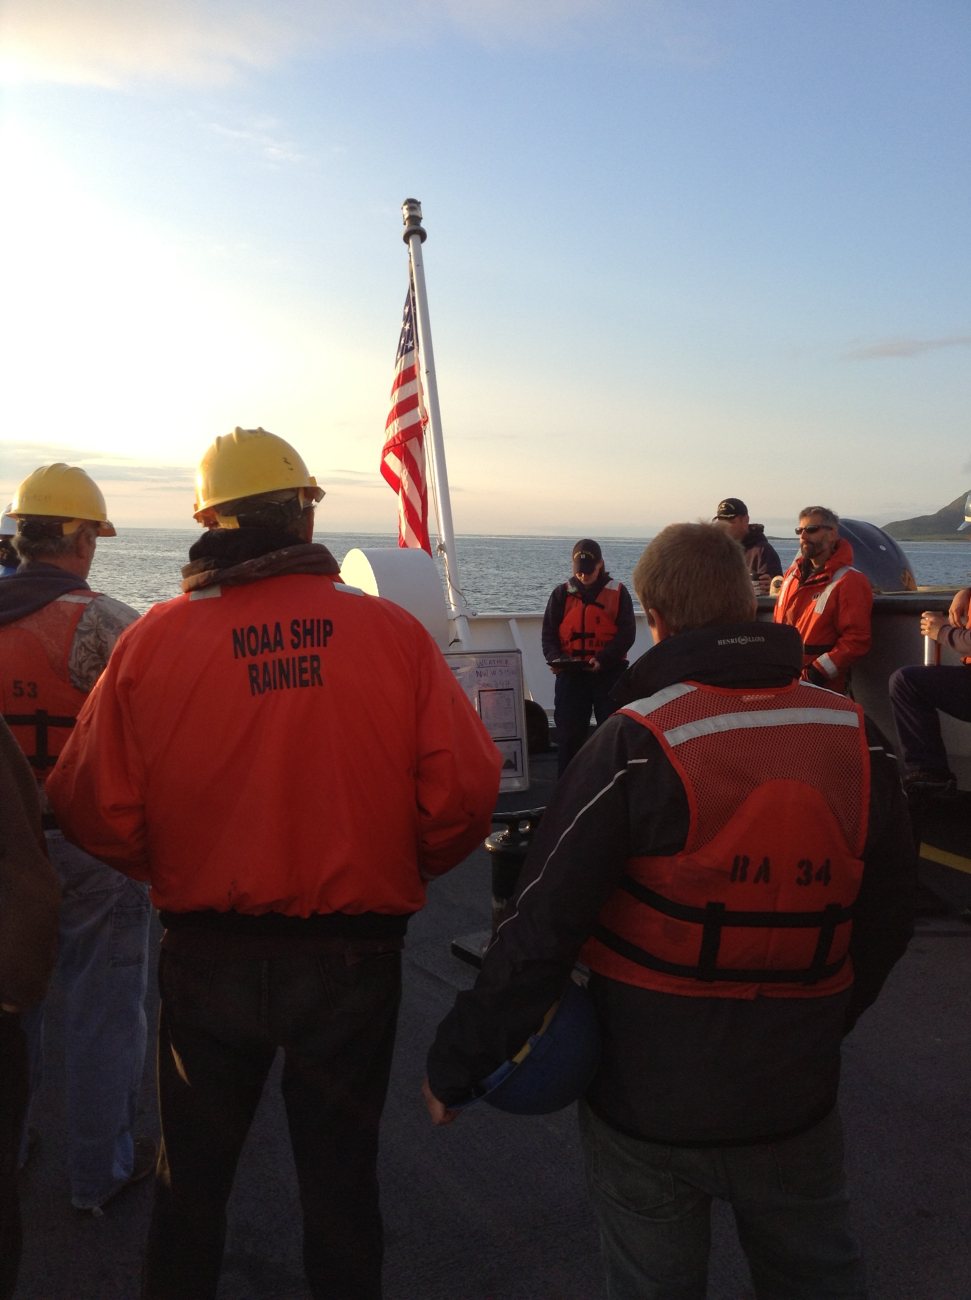 The Field Operations Officer (FOO) Megan McGovern, leads a morning safetymeeting prior to sending out the launches from the NOAA Ship RAINIER